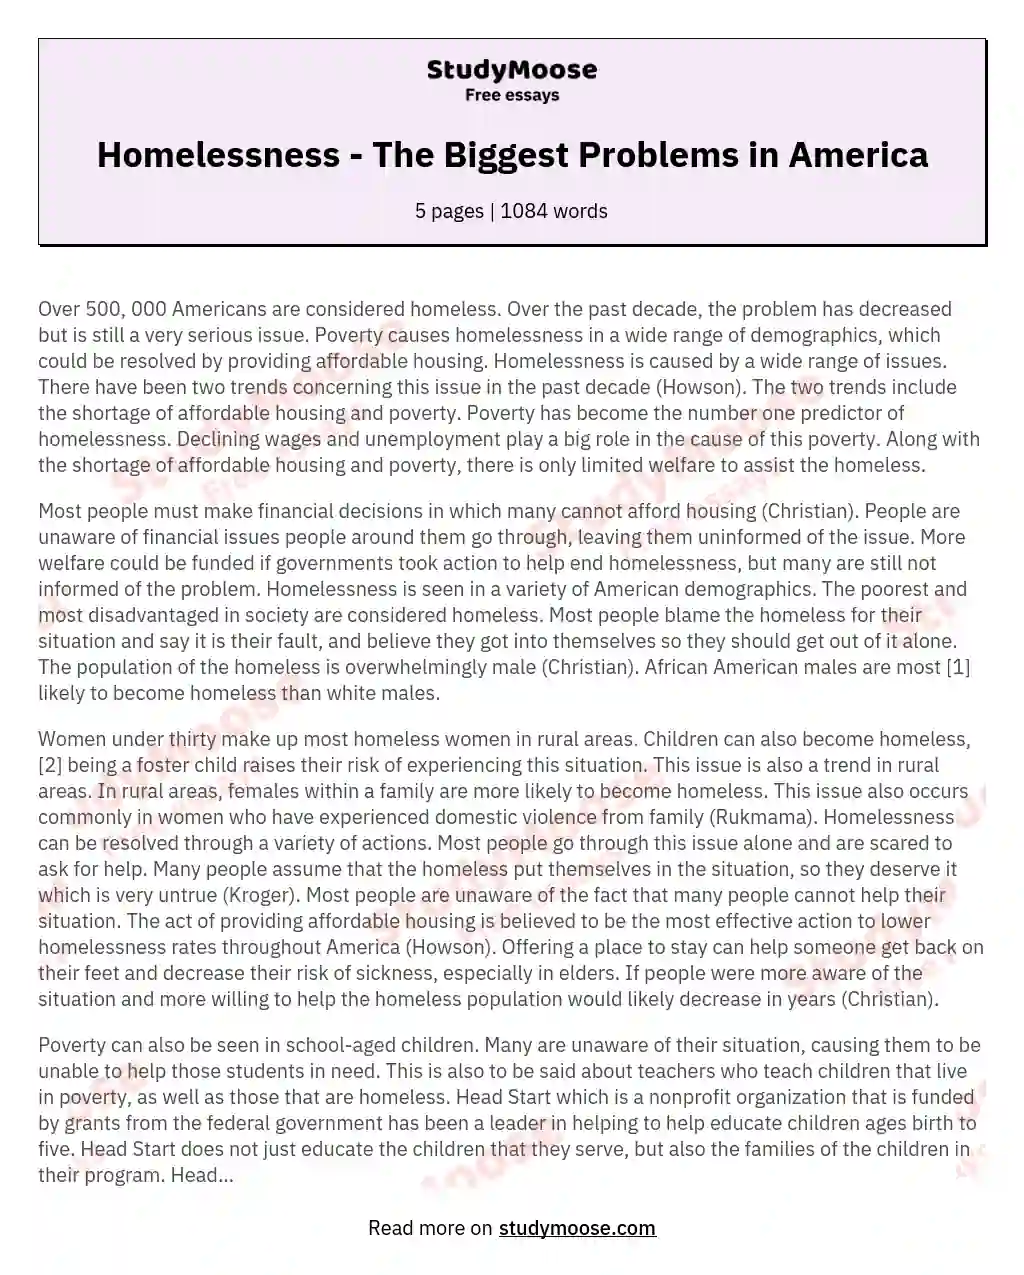 Homelessness - The Biggest Problems in America essay